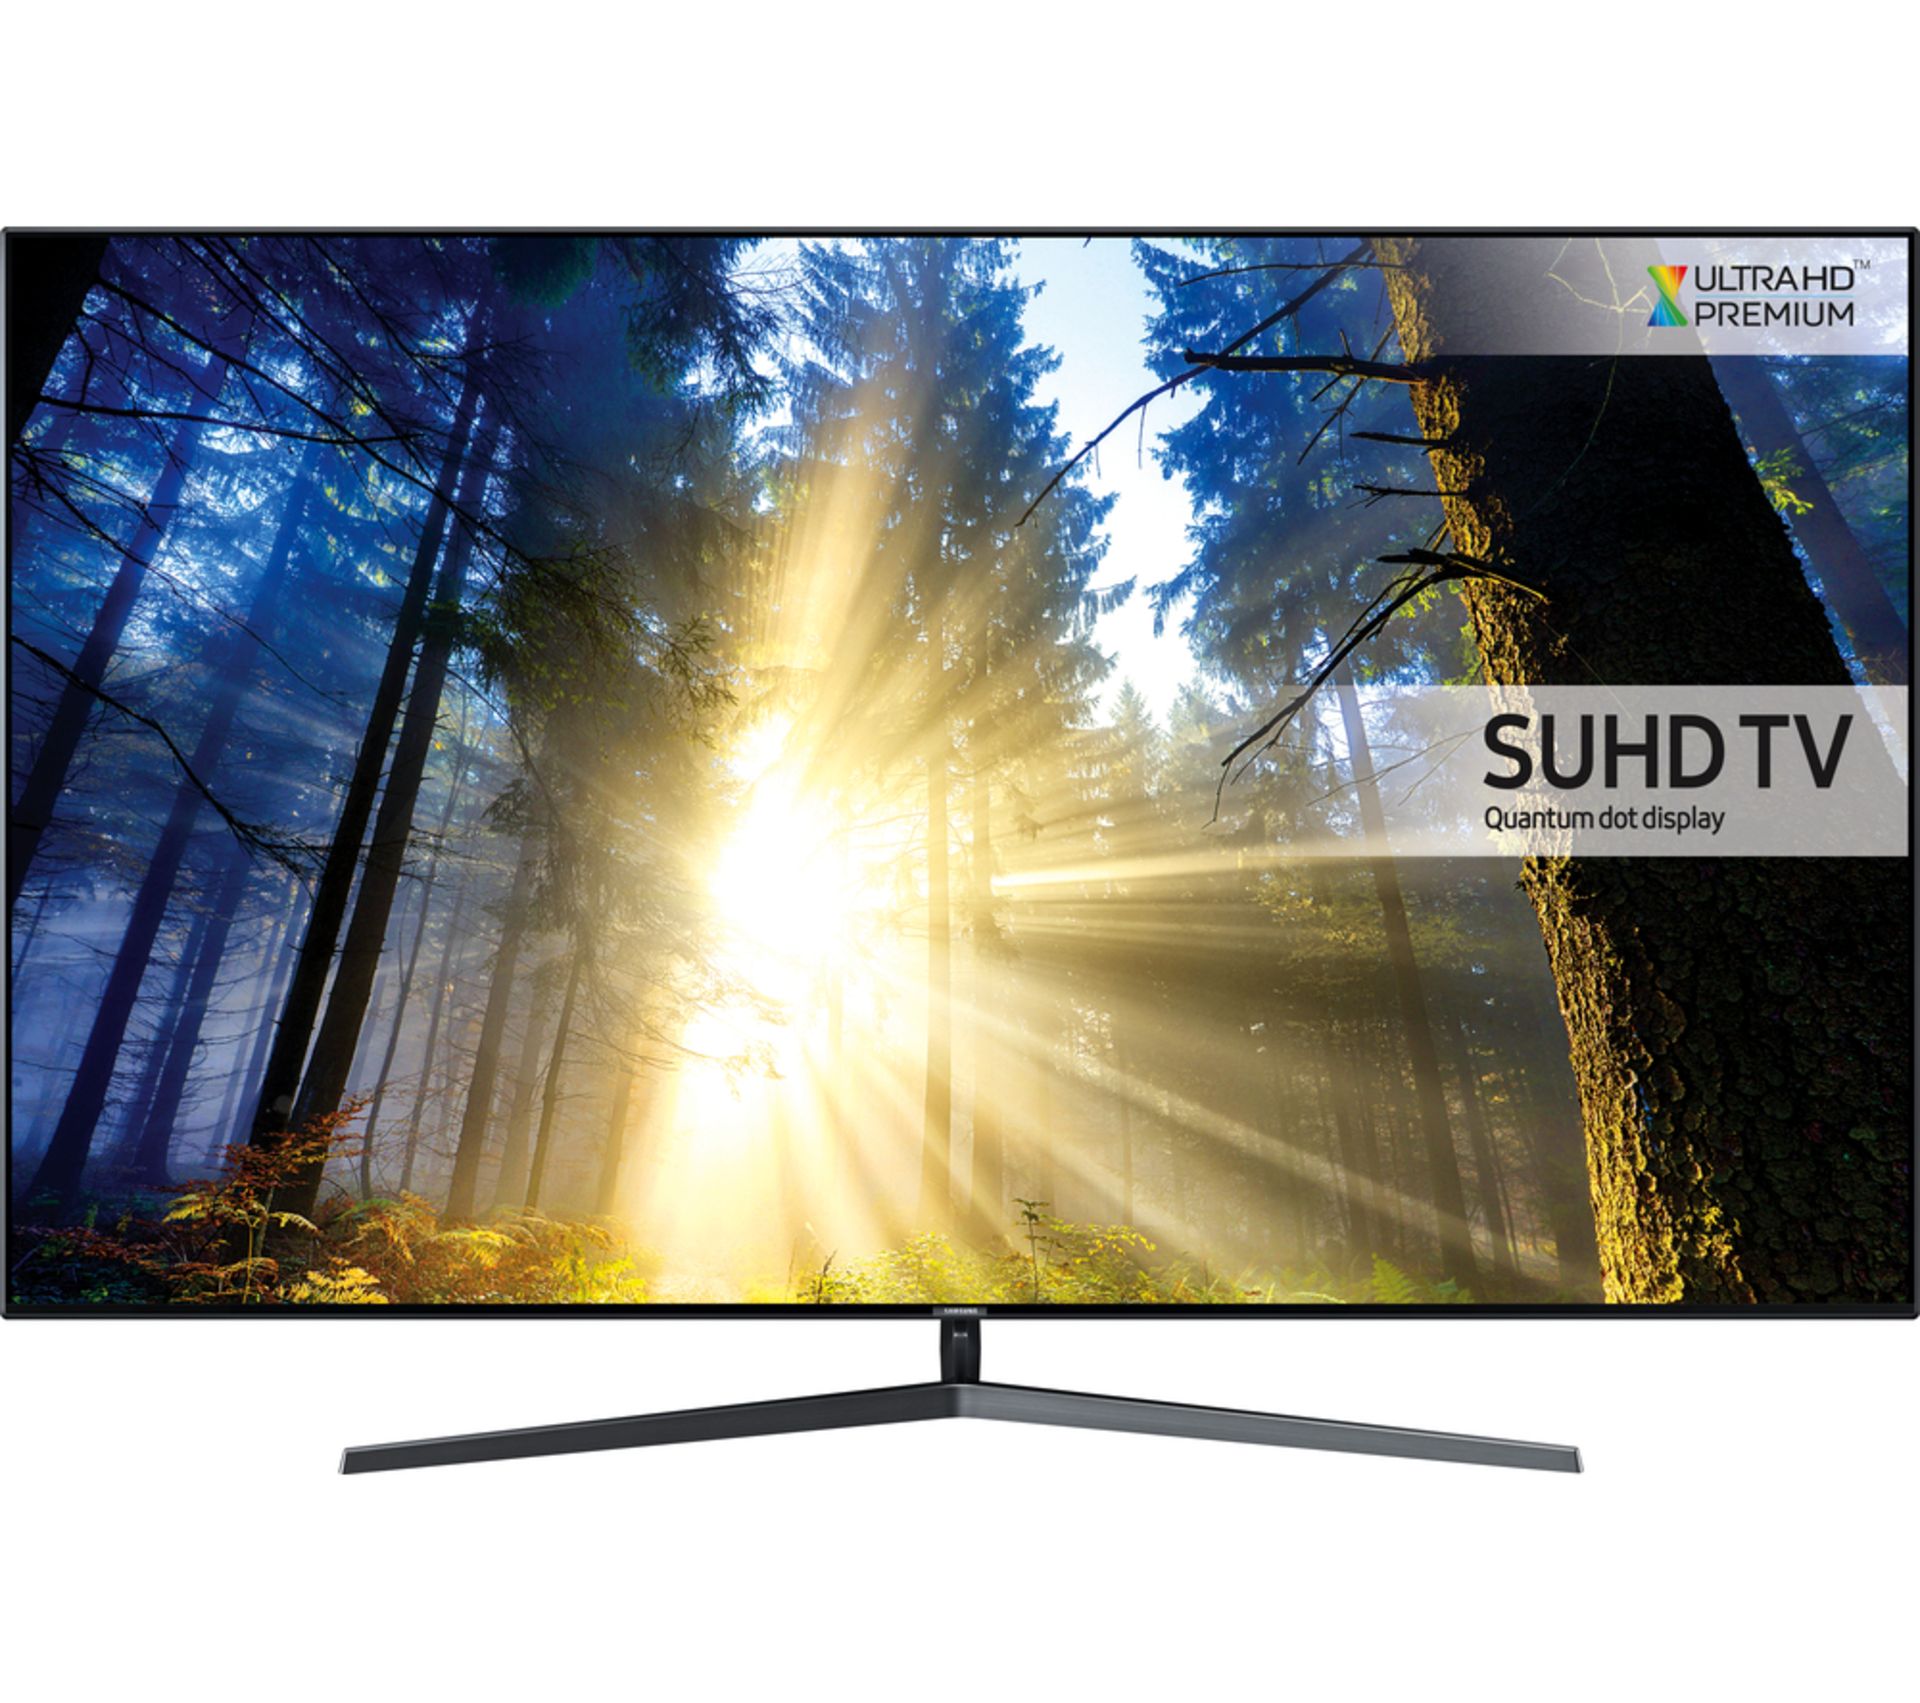 SAMSUNG UE55KS8000 Smart 4k Ultra HD HDR 55" LED TV. RRP £1,899. 4k Ultra HD picture is up to 4 - Image 4 of 6